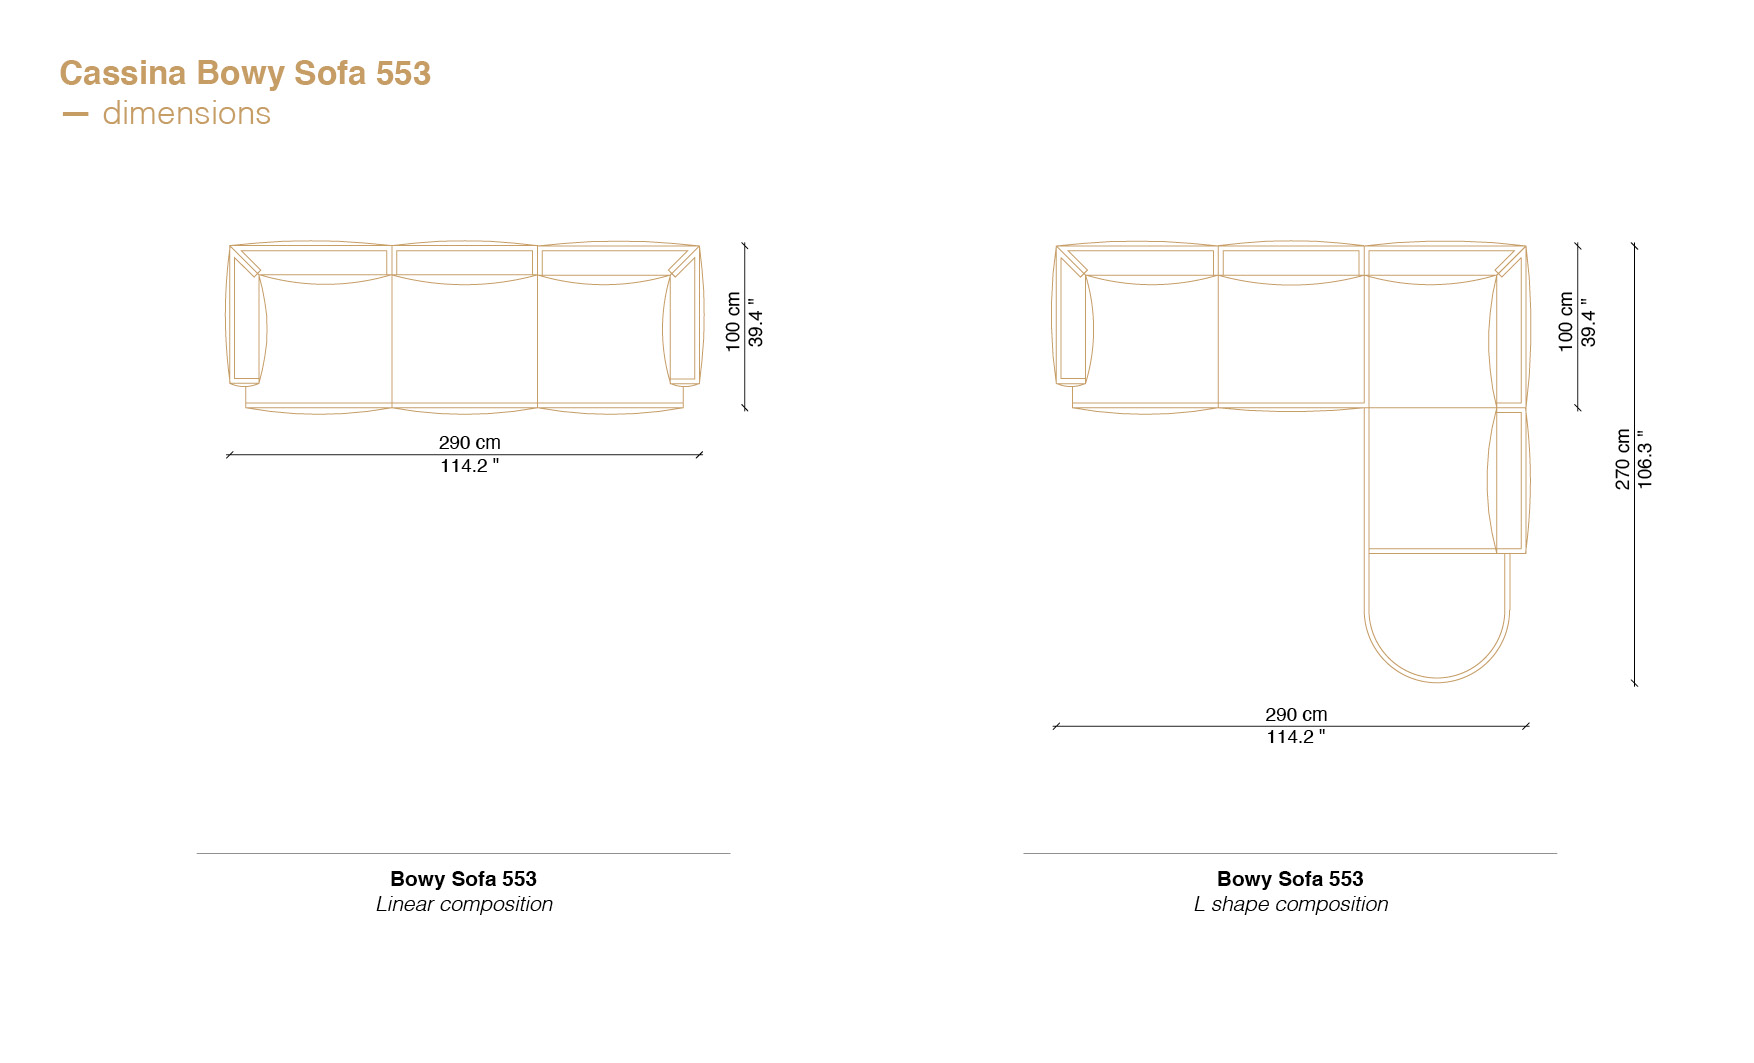 Bowy sofa dimensions and Cassina sofa price informations